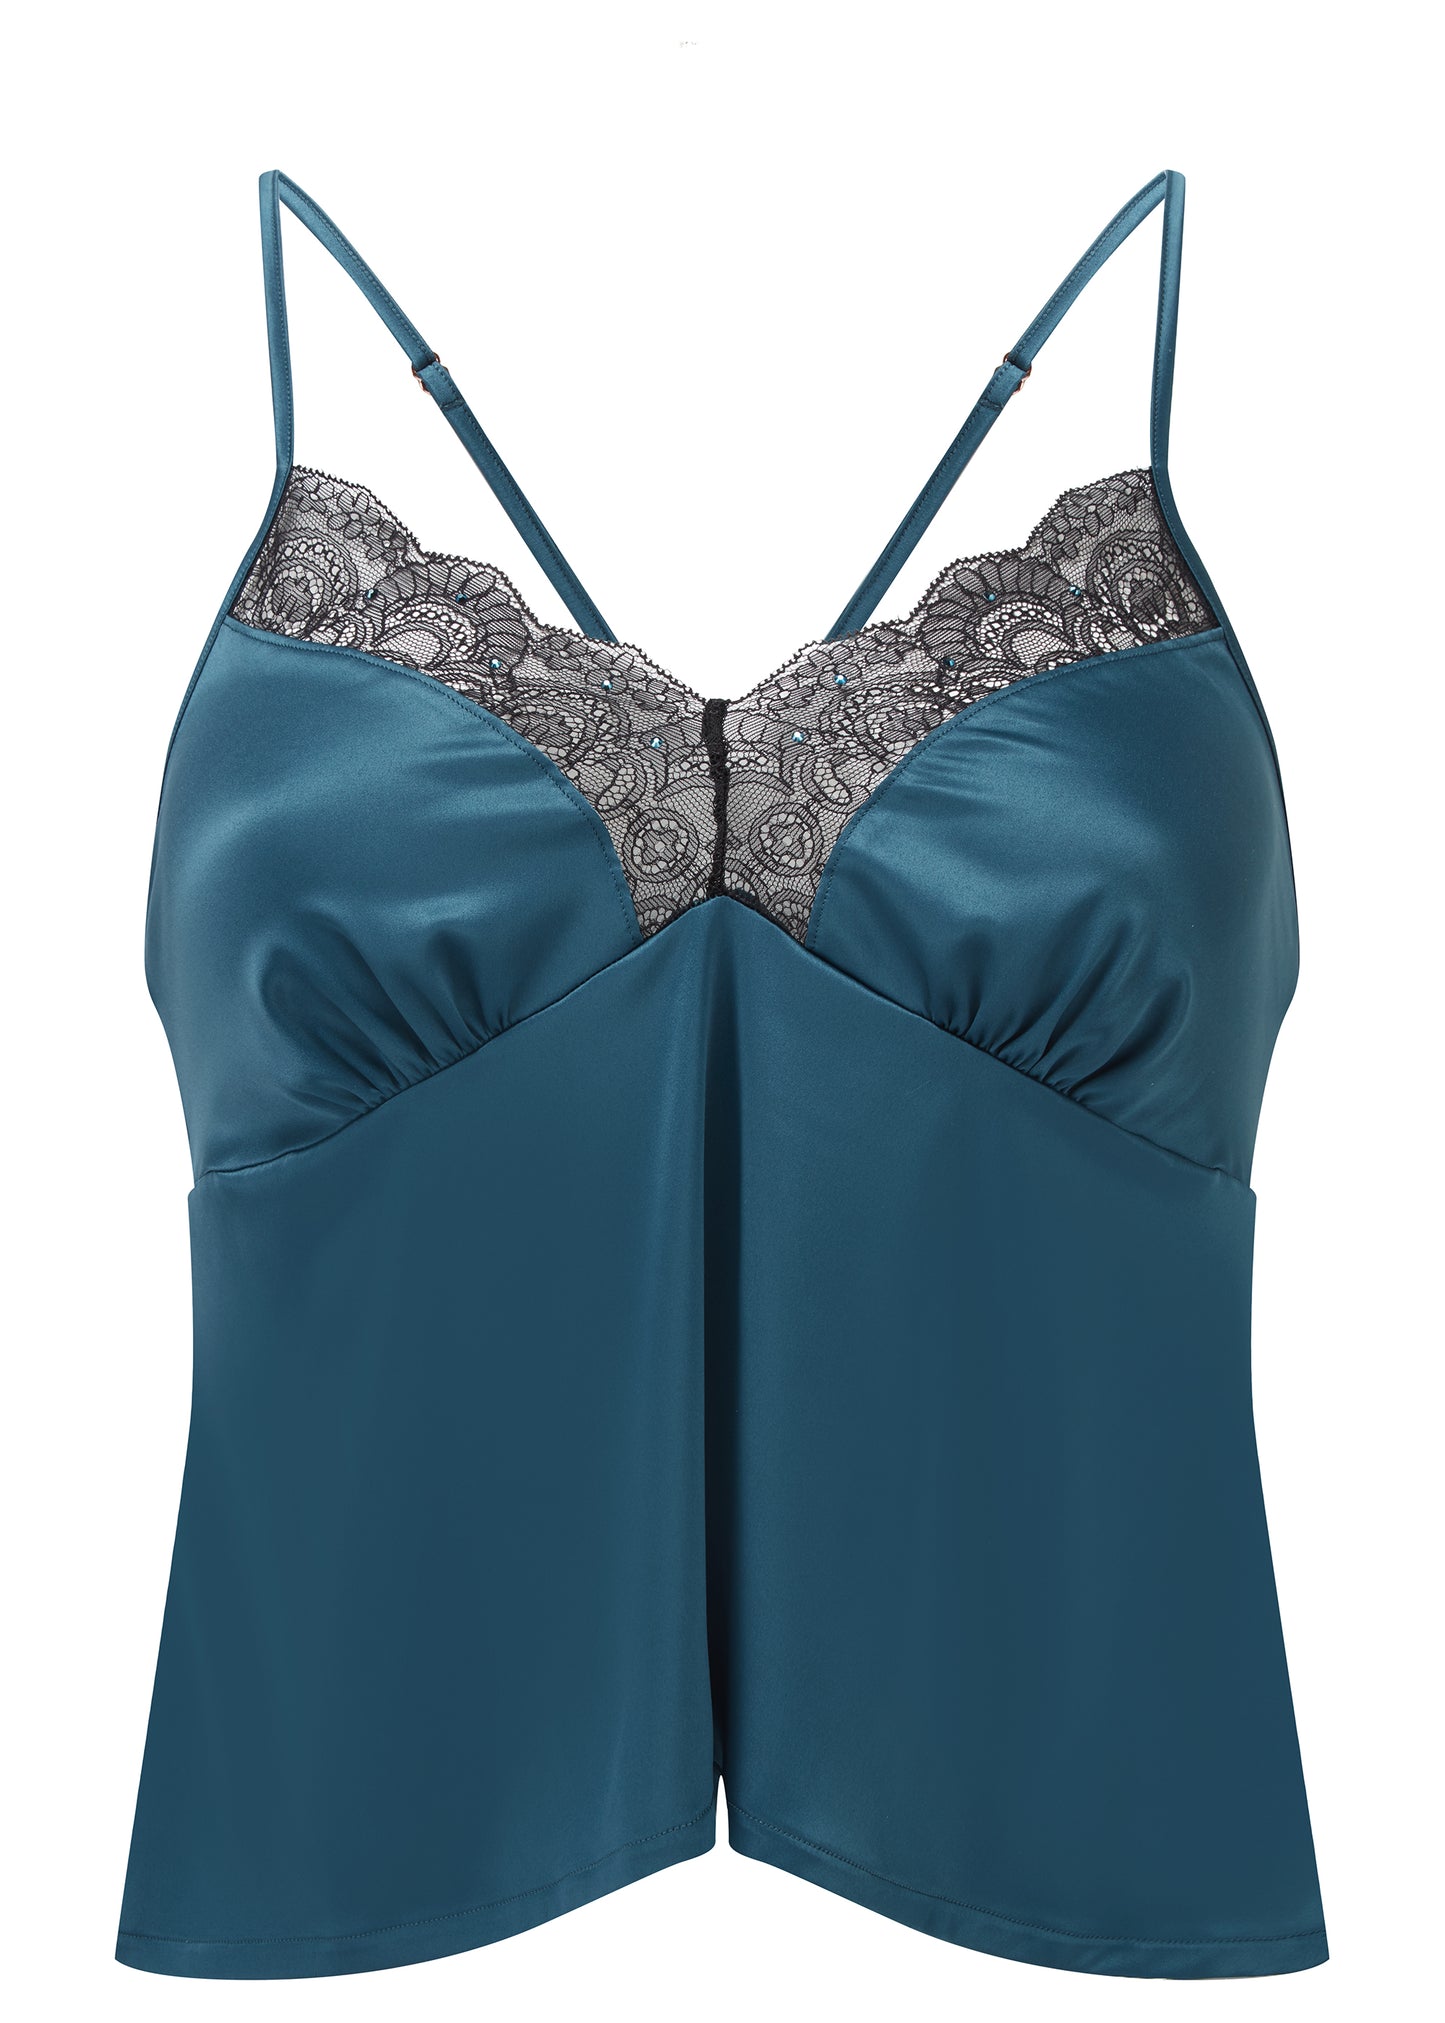 VIP Confession Satin Cami Top in Teal/Black By Gossard - XS-L